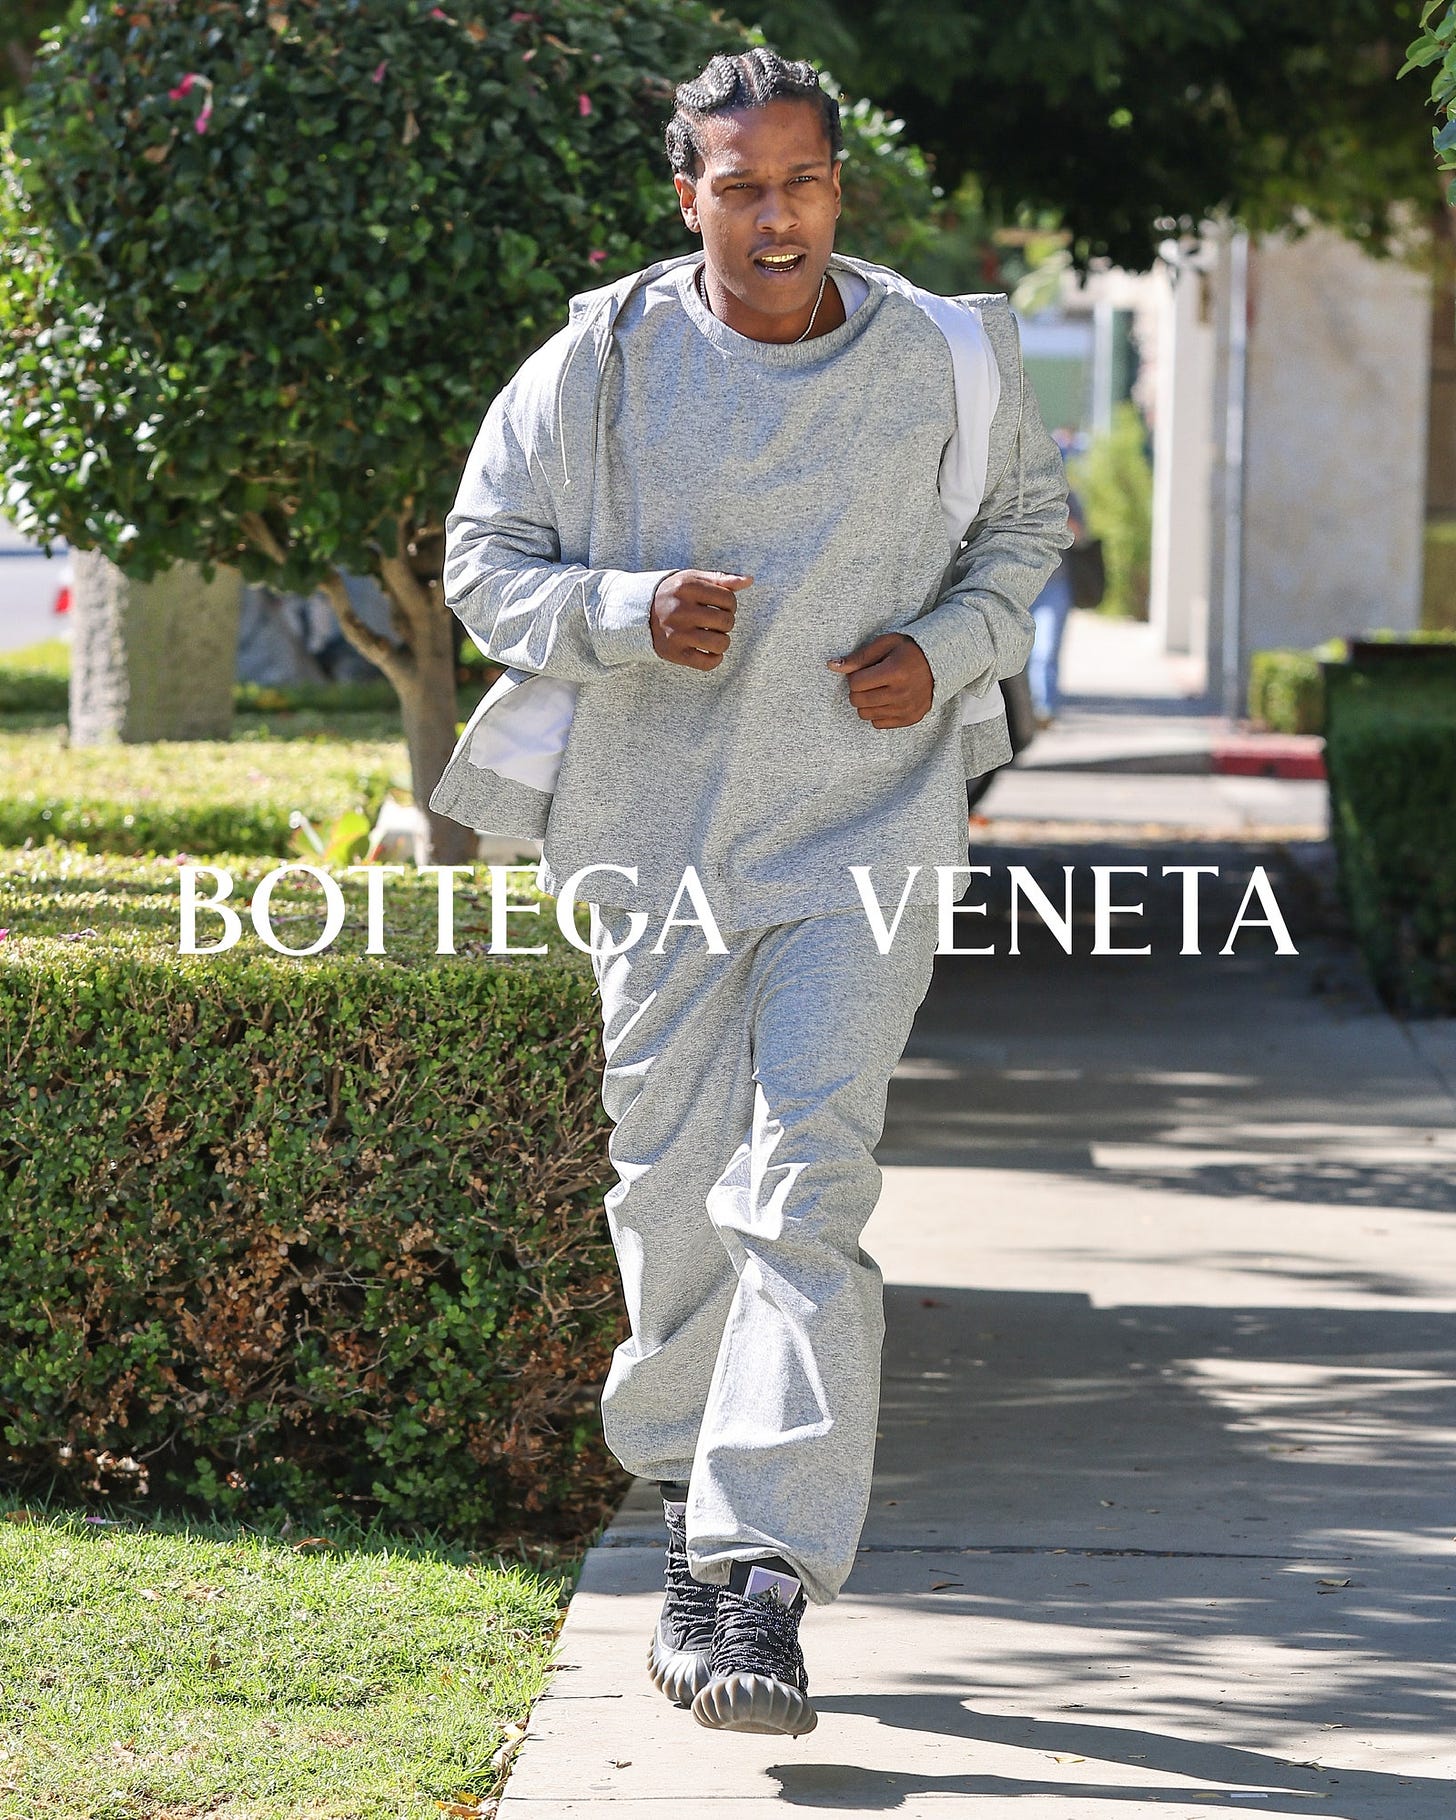 Bottega Veneta and AAP Rocky Called the Paparazzi for Uncanny New Campaign